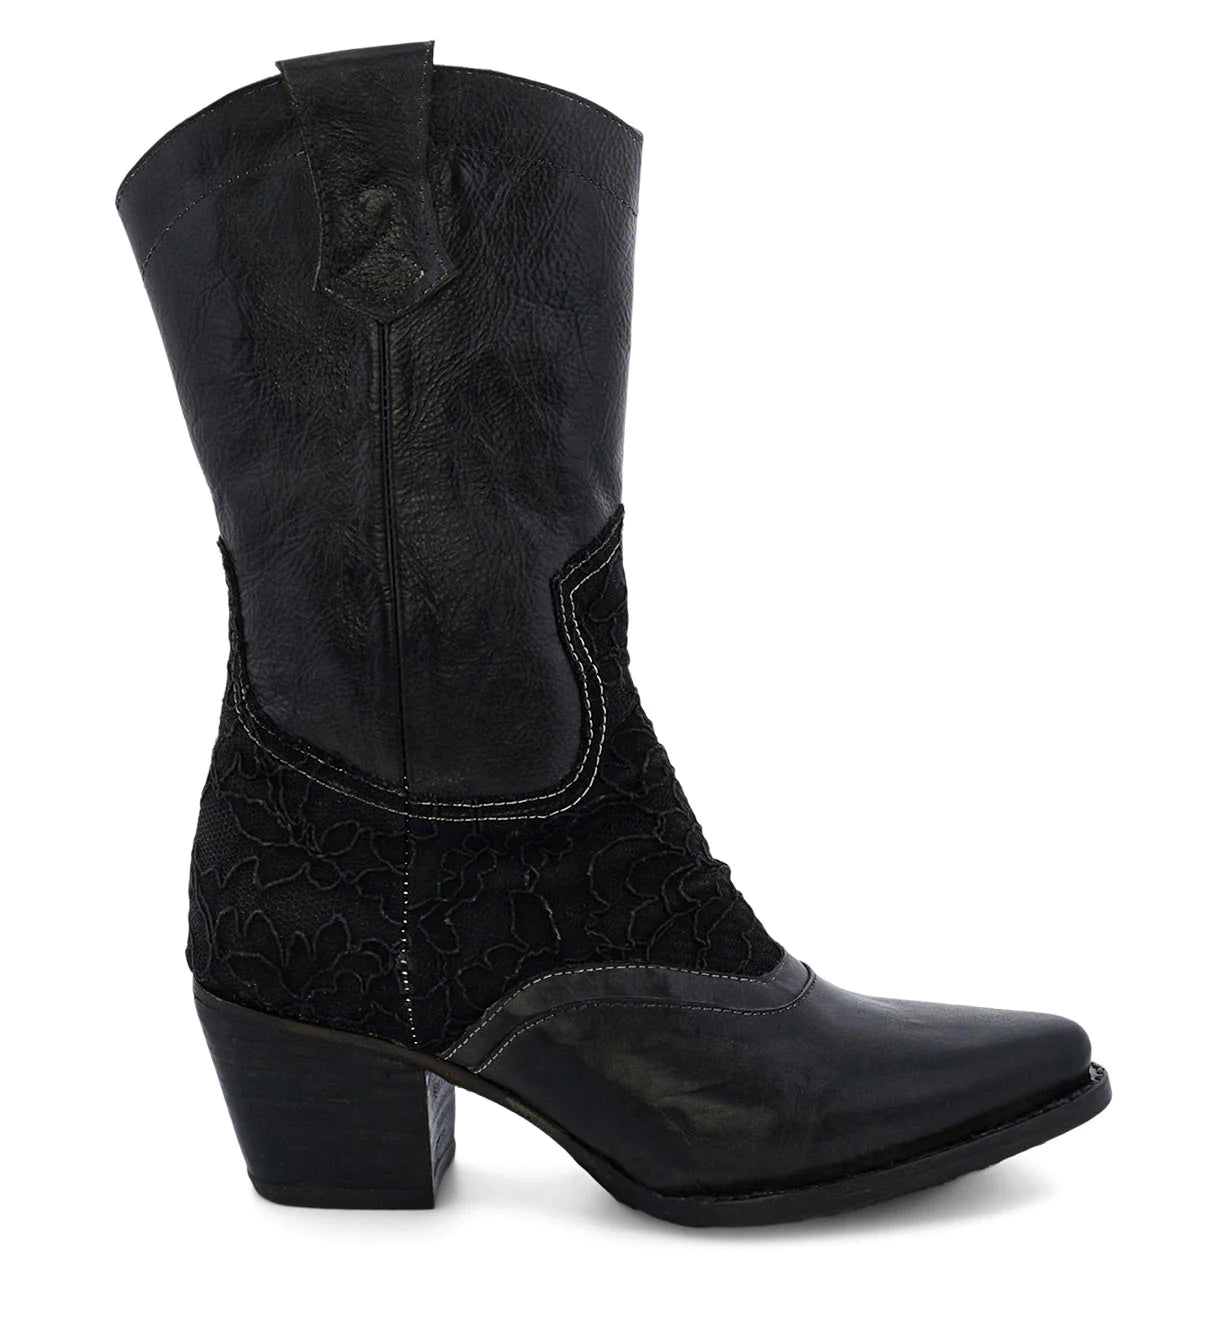 Basanty Mid-Calf Cowgirl Boots in Black